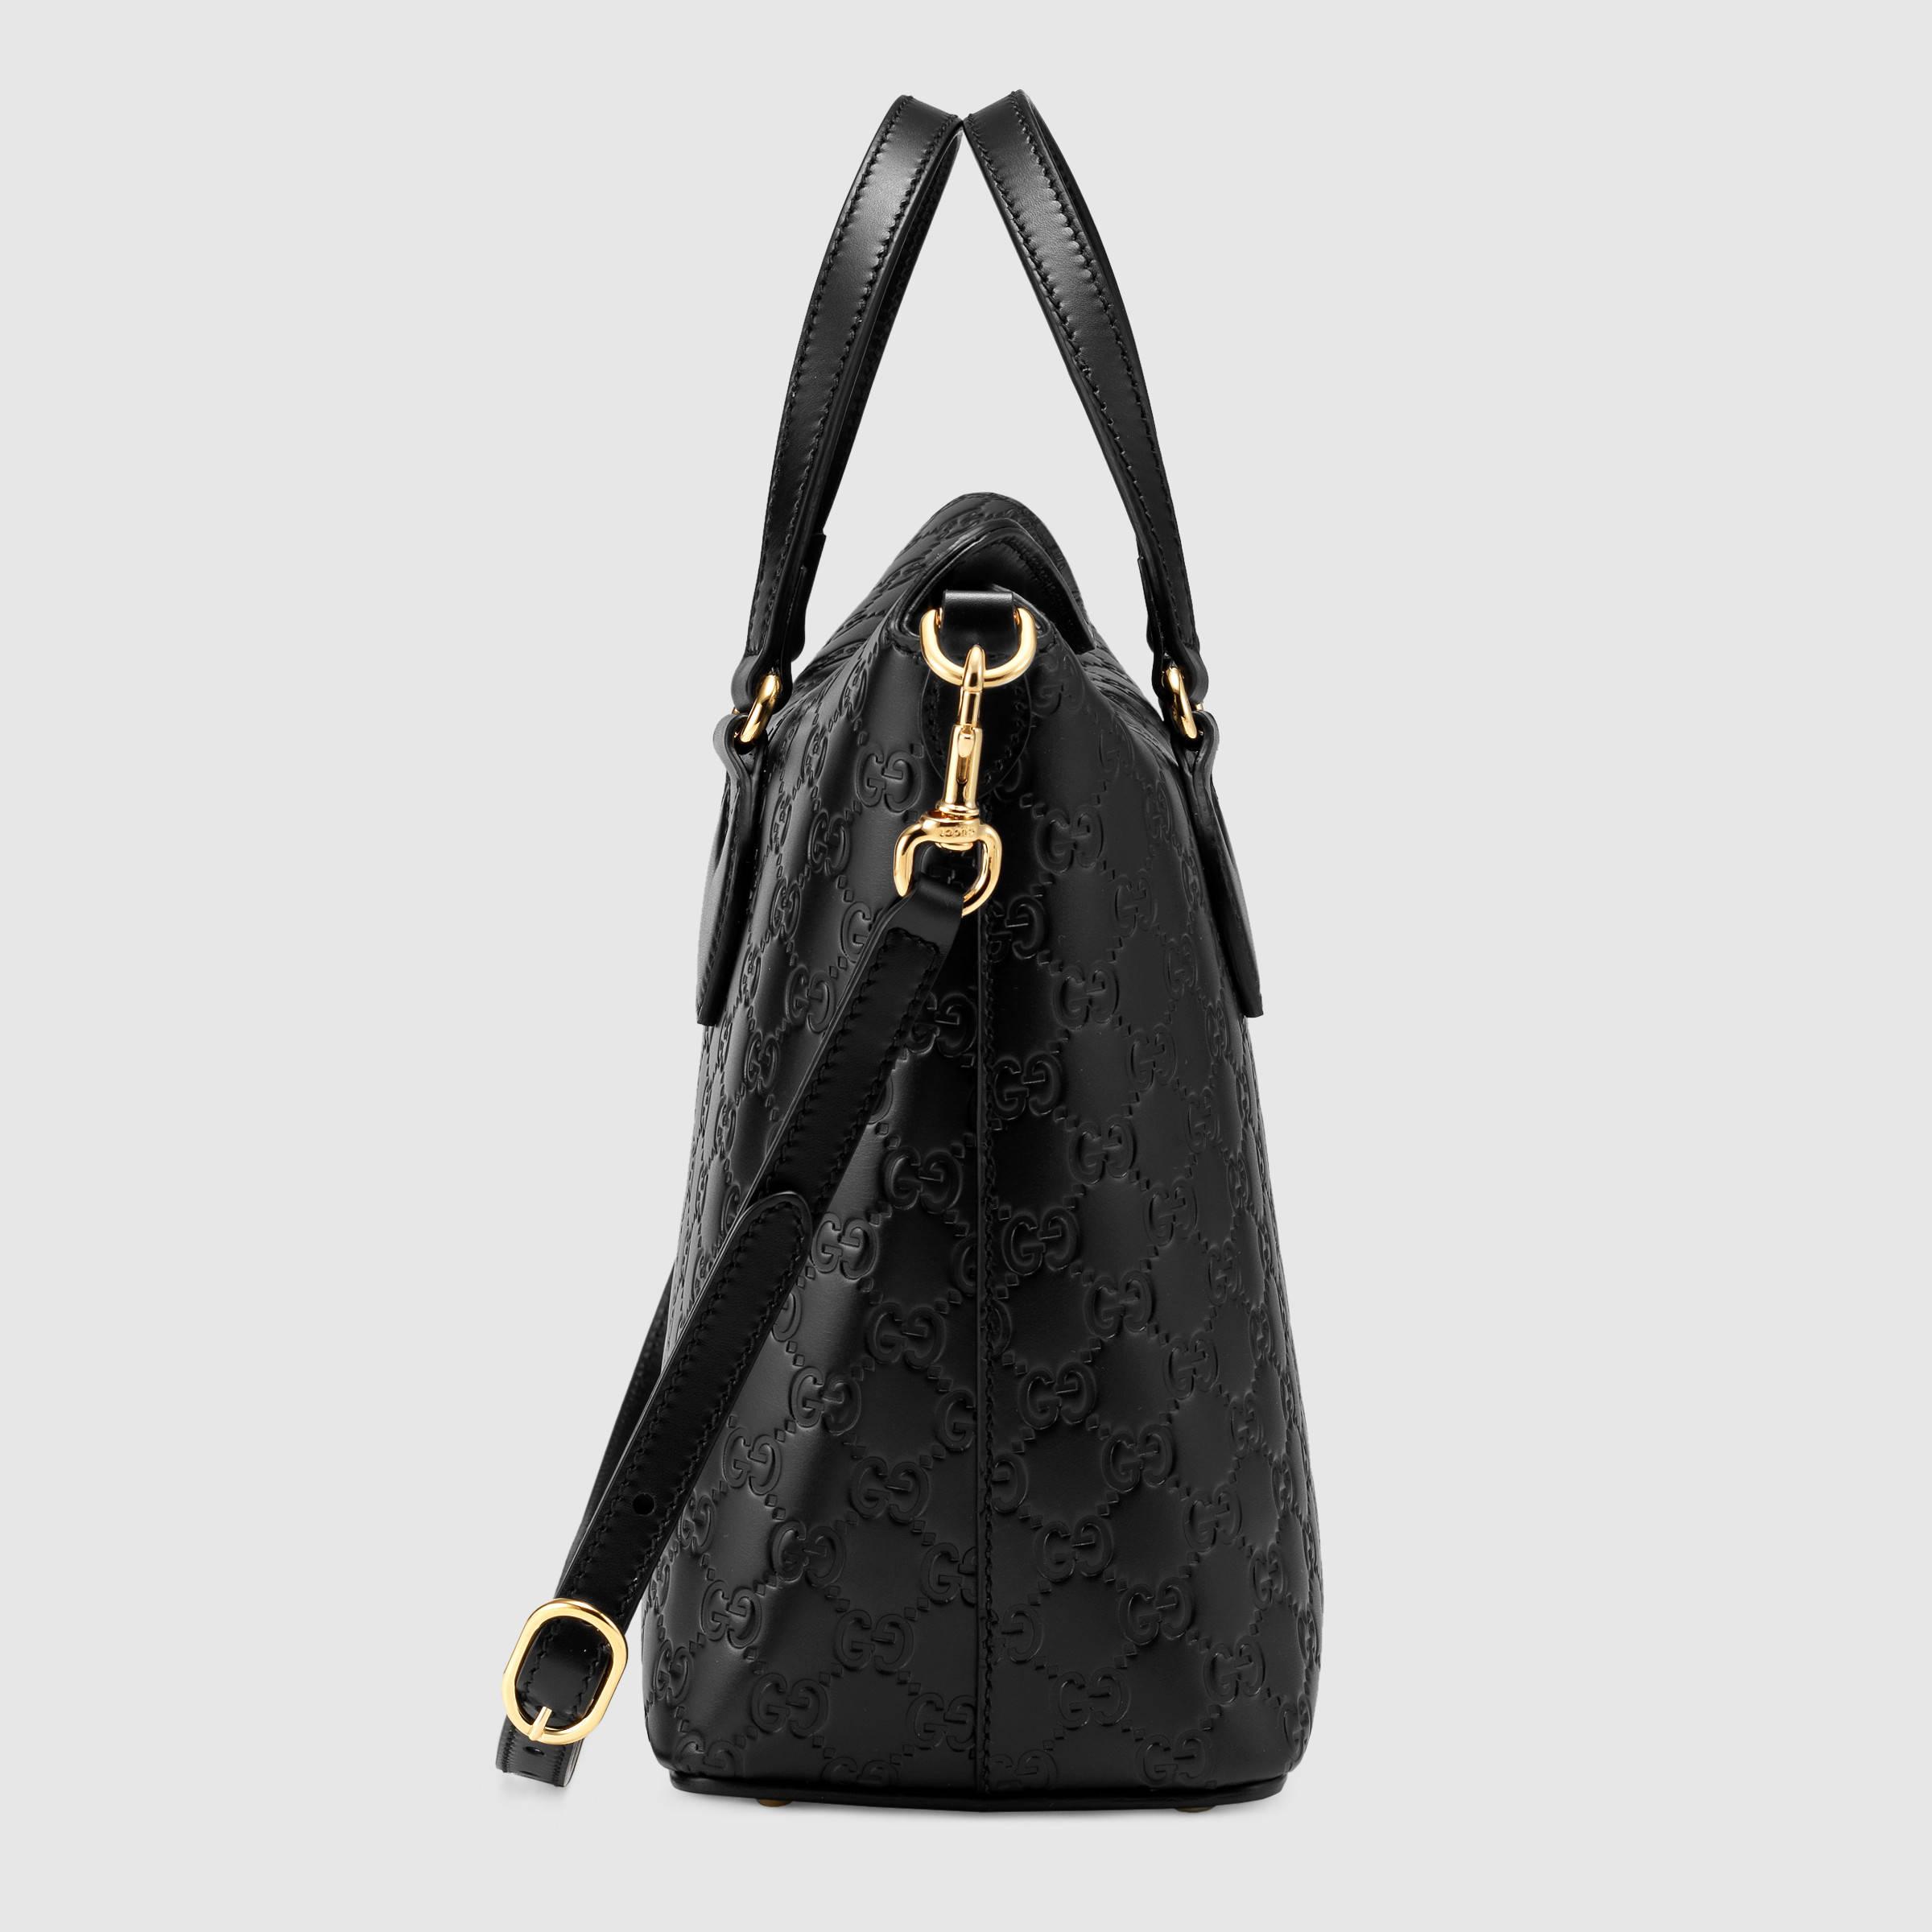 GUCCI Black Leather Signature Extra Large Tote Bag 189680-US